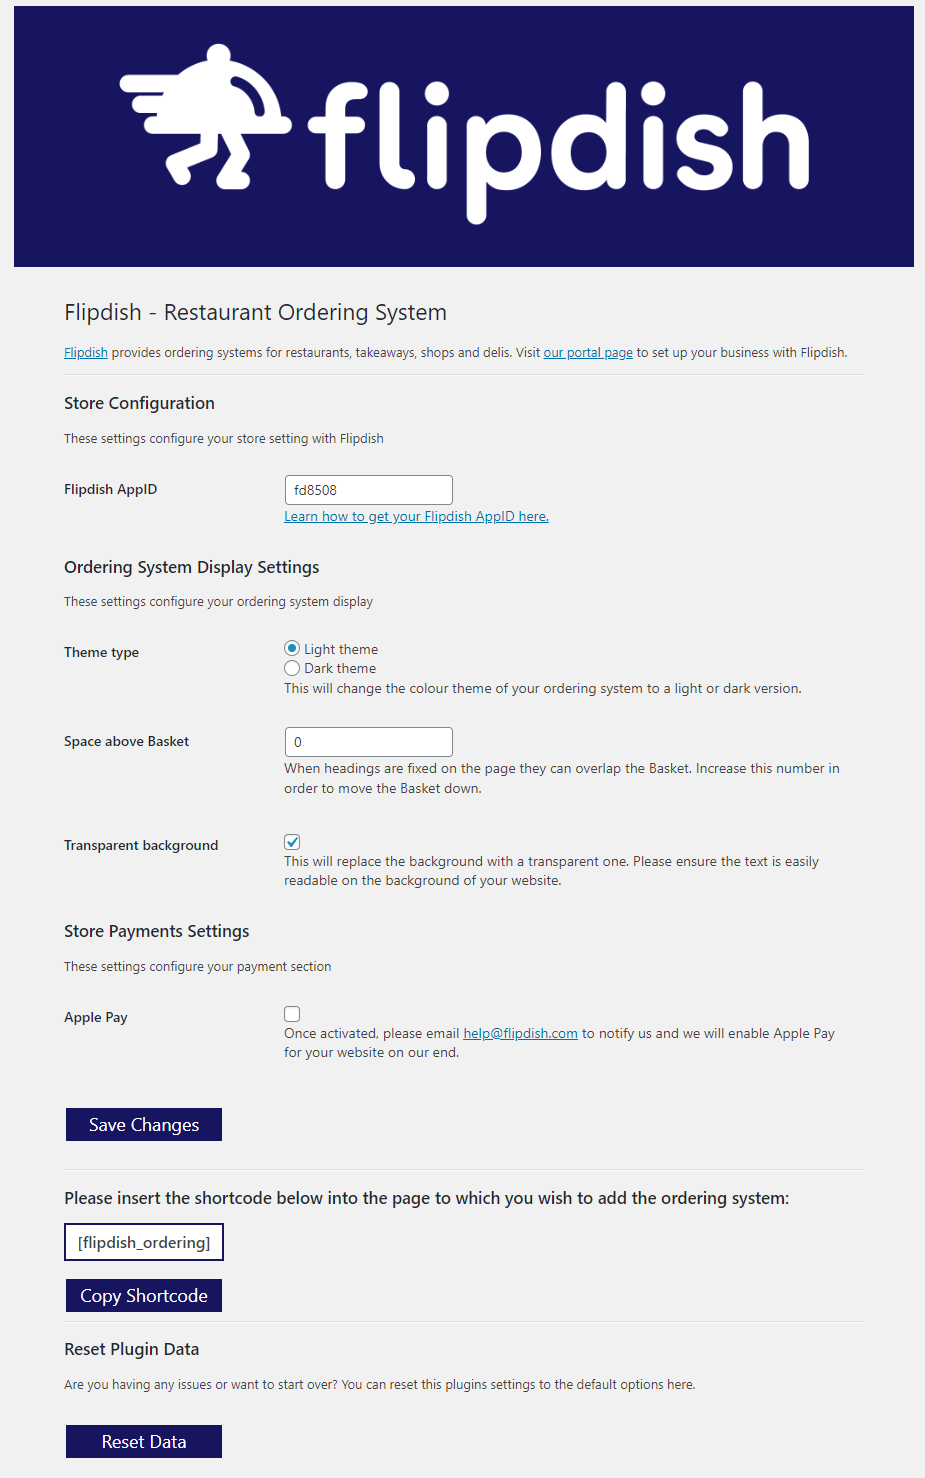 Flipdish ordering settings page. Configure store settings, styling and payments.